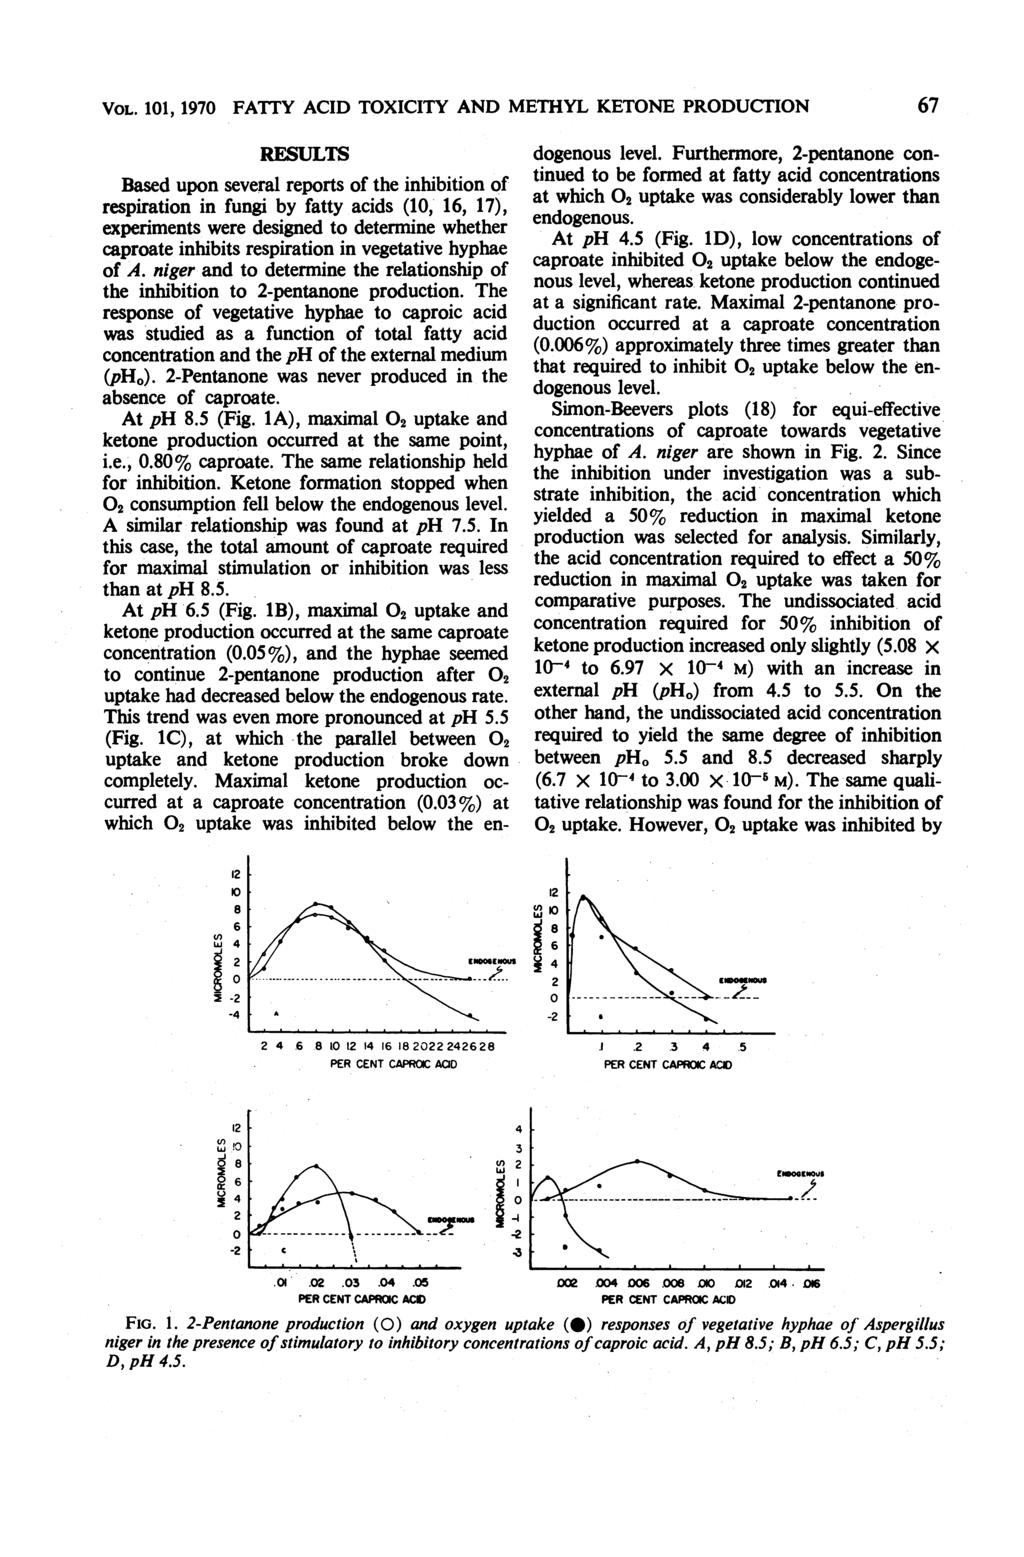 VOL. 11, 197 FATTY ACID TOXICITY AND METHYL KETONE PRODUCTION RESULTS Based upon several reports of the inhibition of respiration in fungi by fatty acids (1,' 16, 17), experiments were designed to